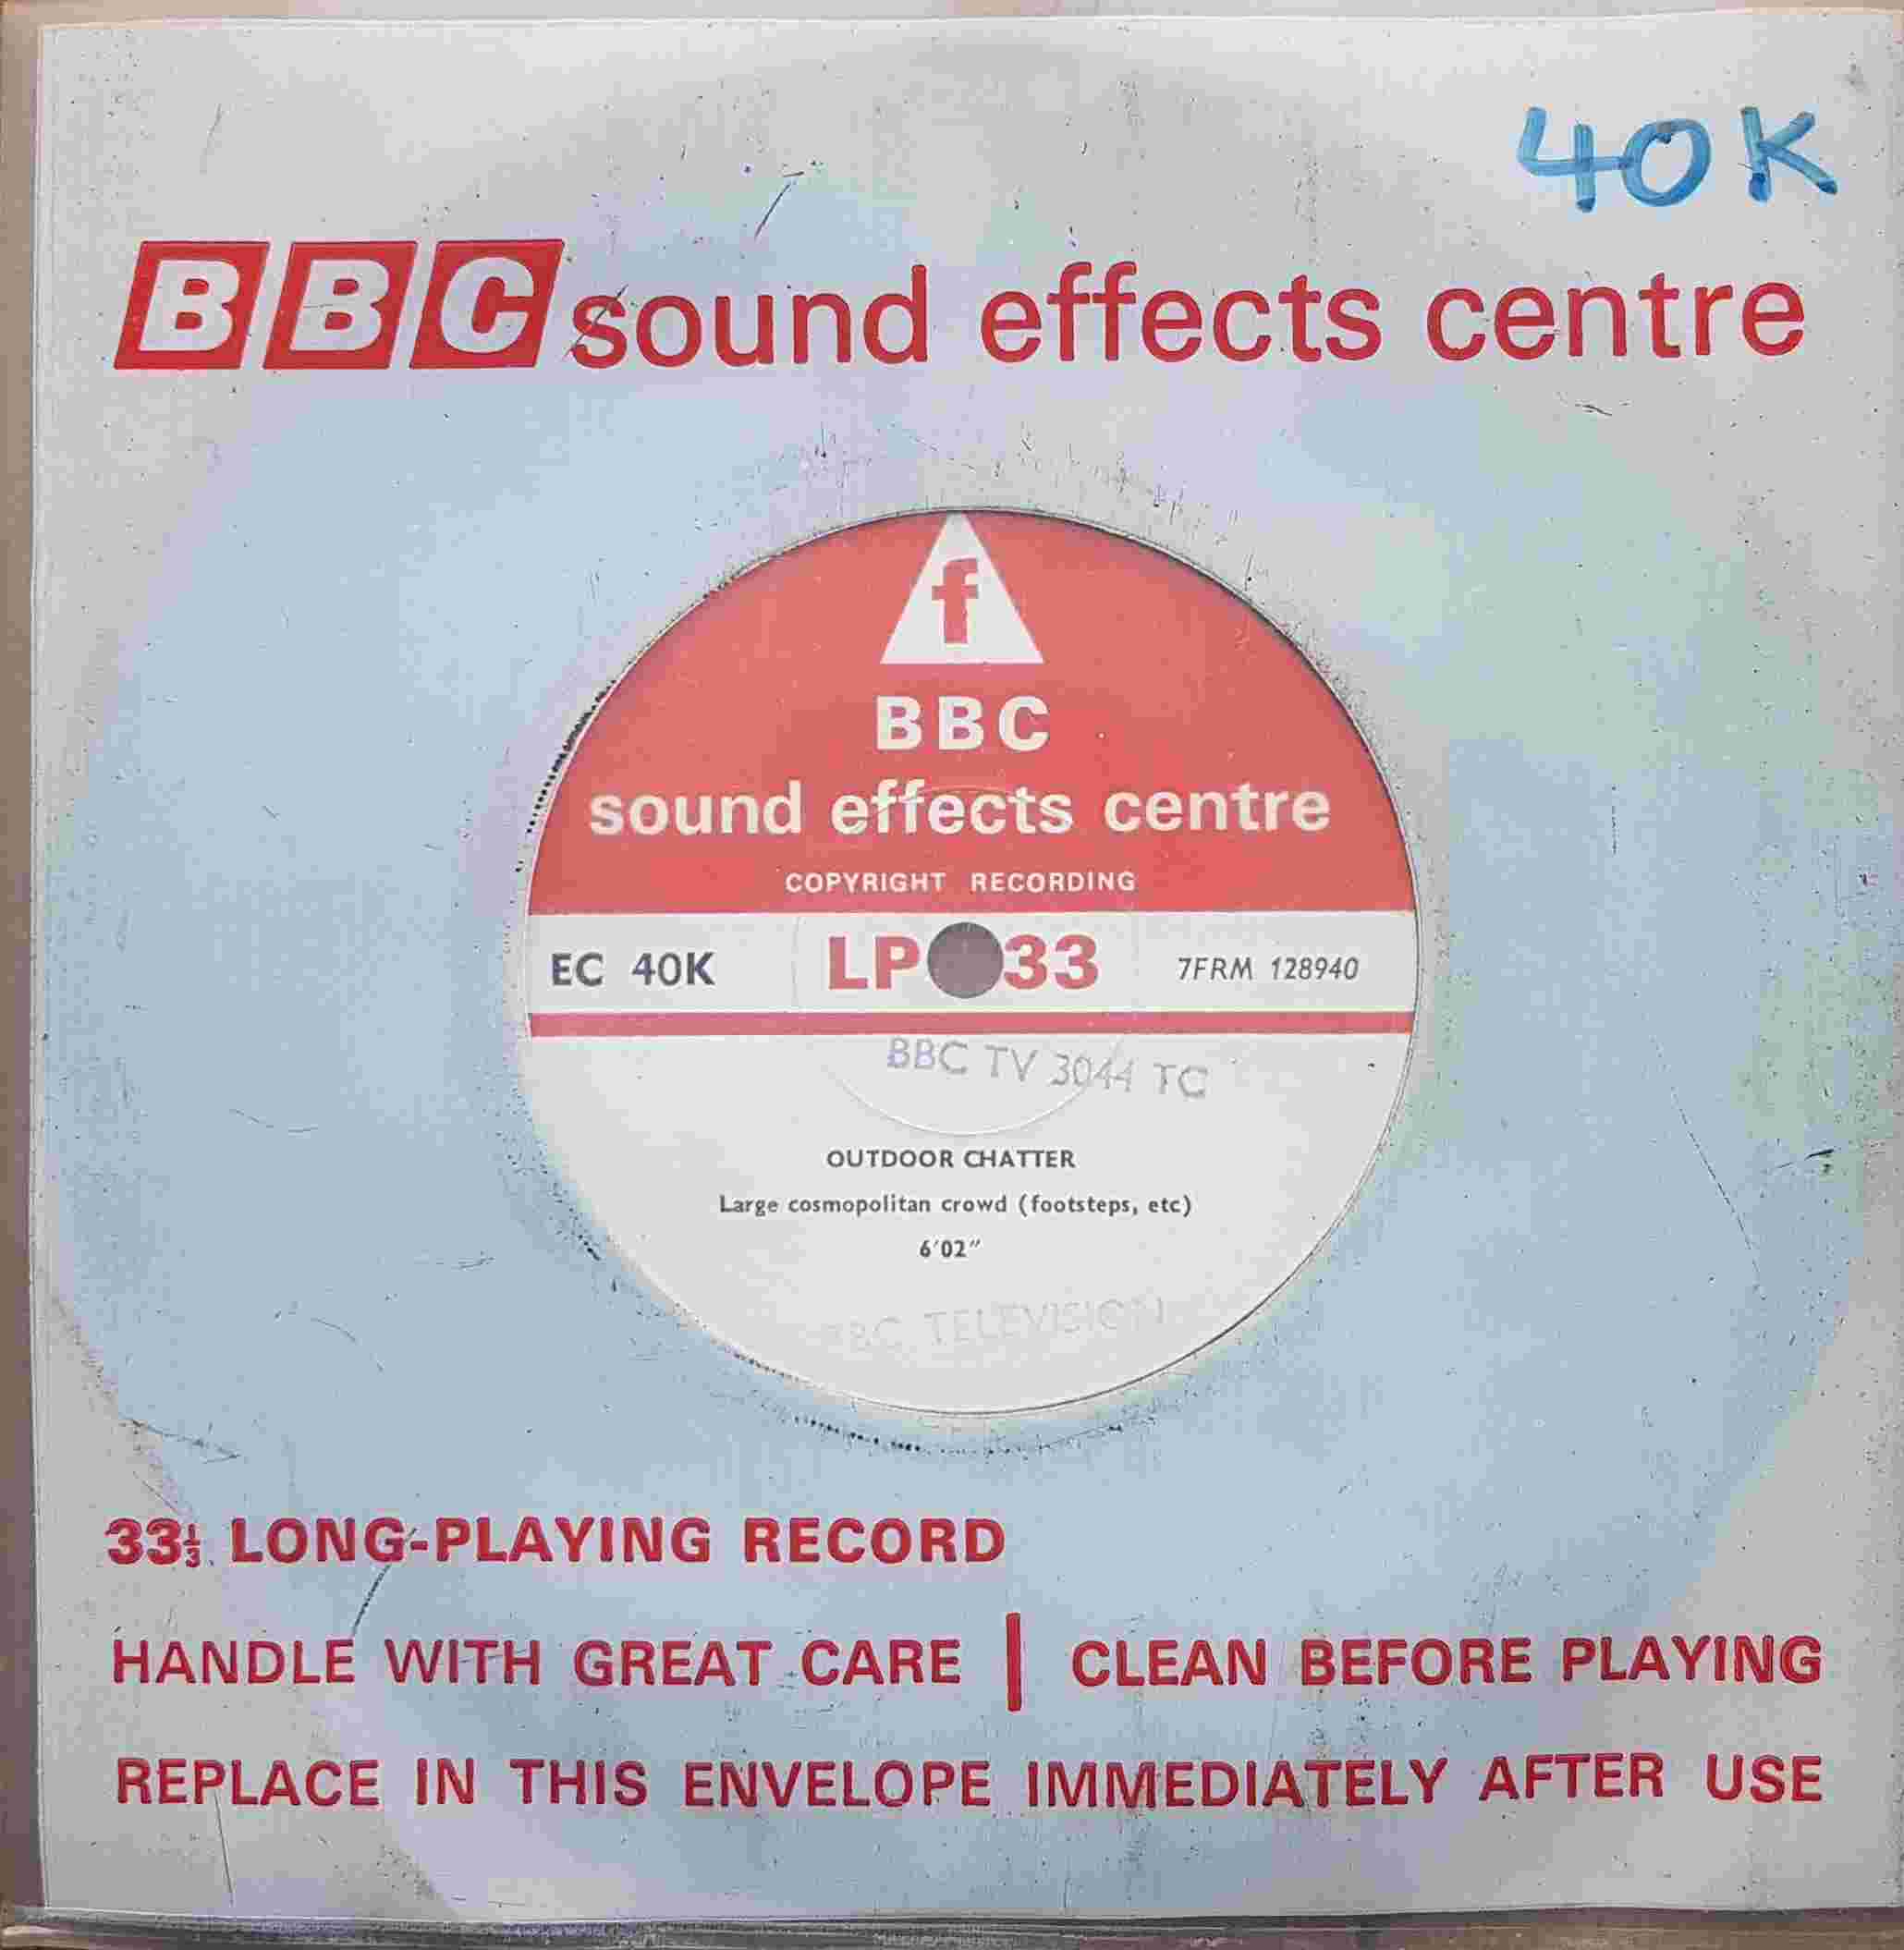 Picture of EC 40K Outdoor chatter / Indoor crowds - small group (English) by artist Not registered from the BBC singles - Records and Tapes library